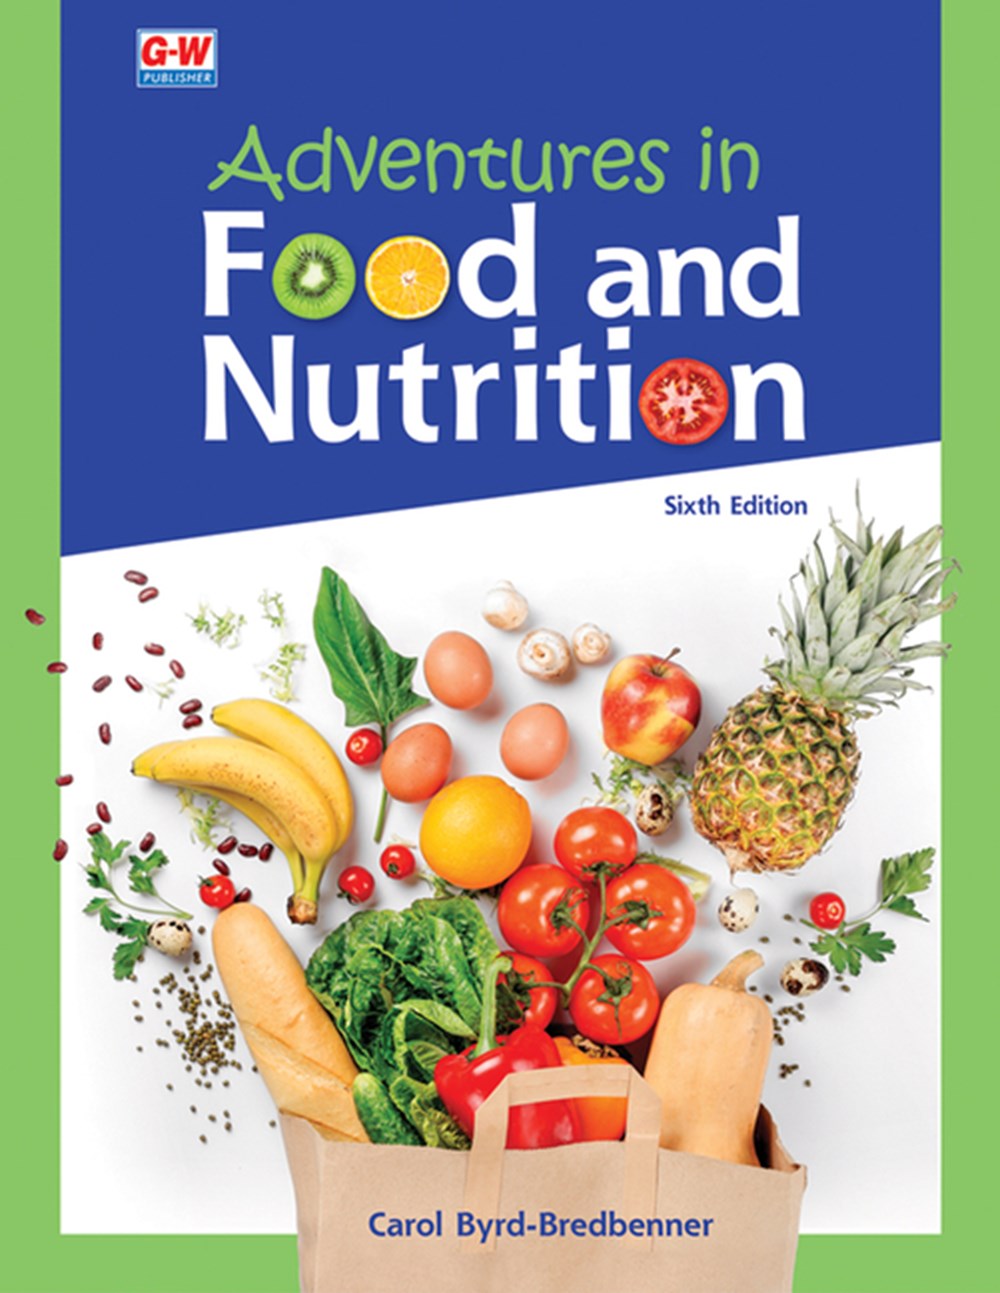 Adventures in Food and Nutrition (Sixth Edition, Revised, Student Textbook)